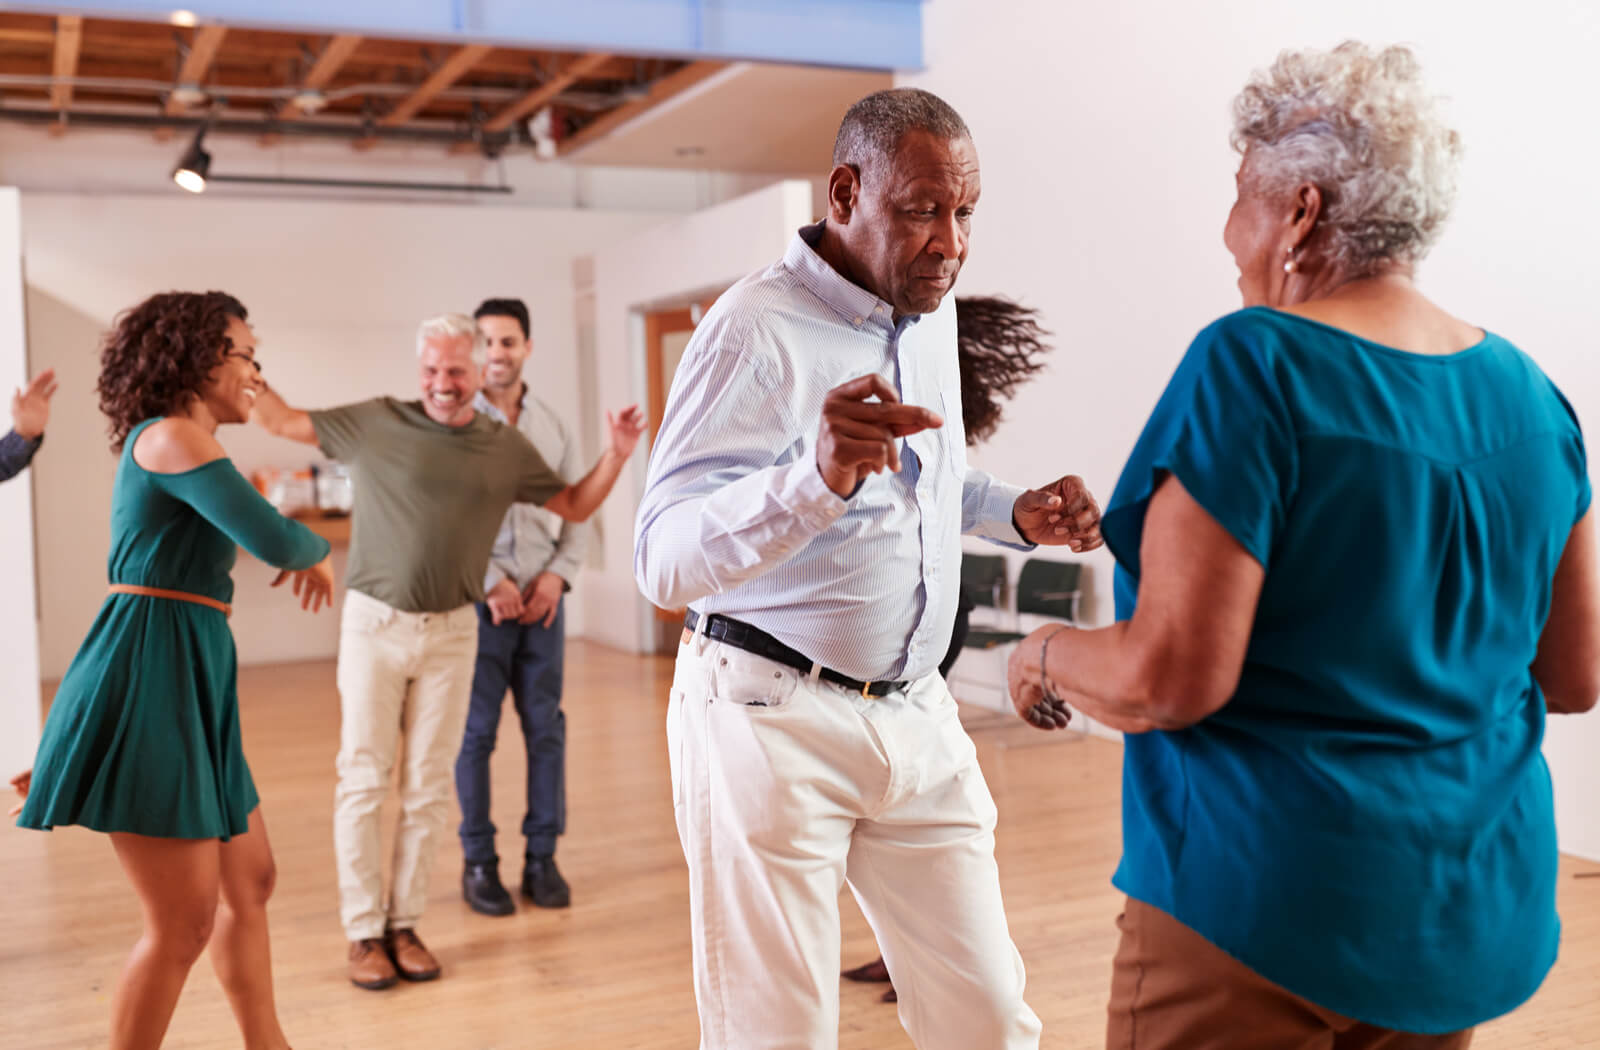 Two seniors dance in the foreground together, while three more people dance in the background behind them.